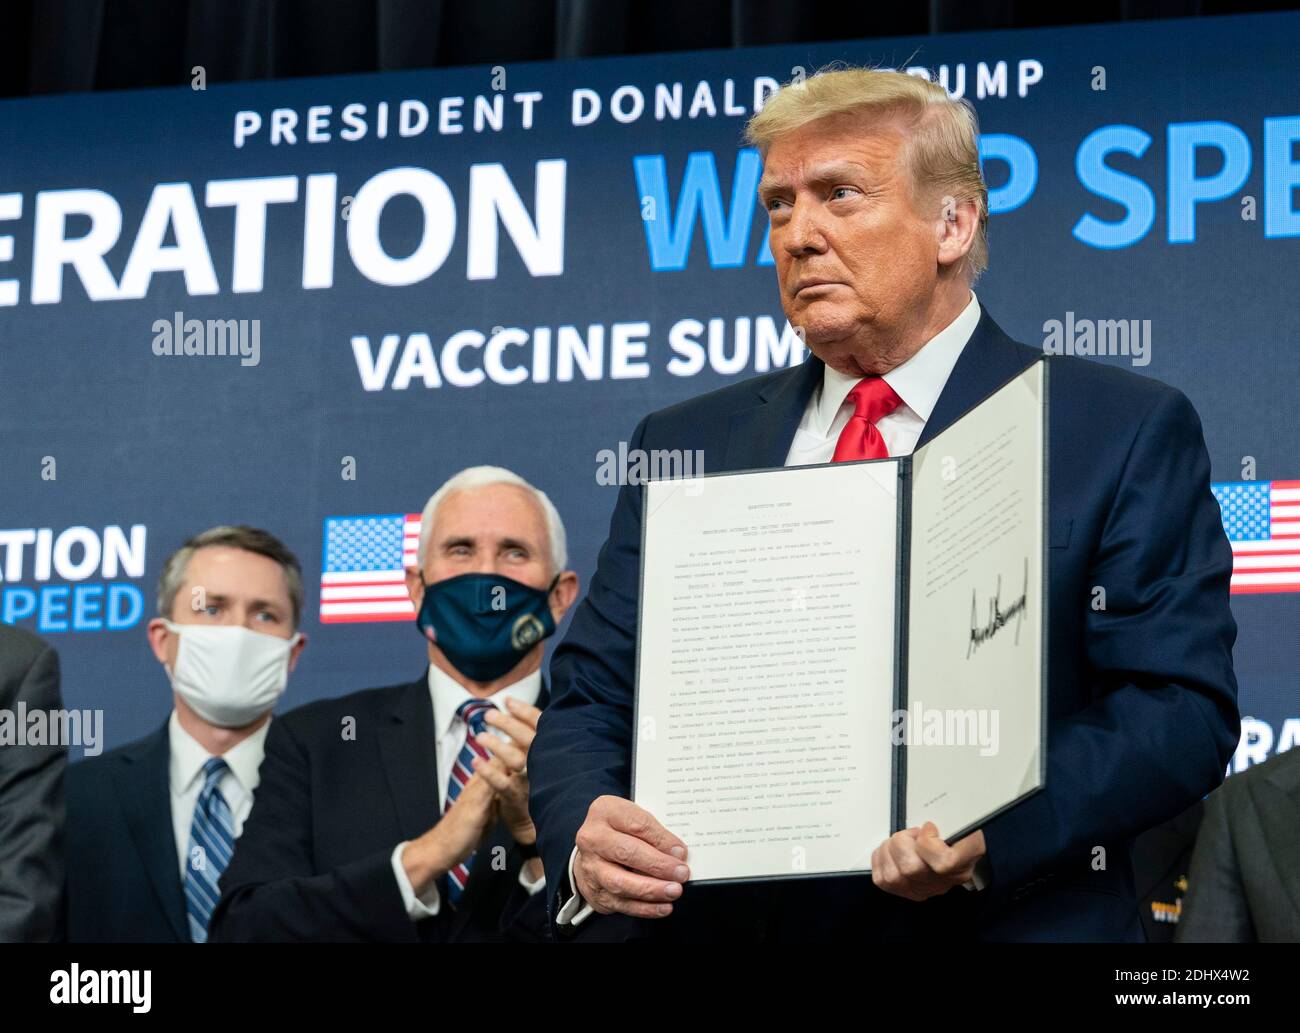 U.S President Donald Trump, joined by Vice President Mike Pence holds up a signed Executive Order on access to vaccines at the Operation Warp Speed Vaccine Summit in the South Court Auditorium at the Eisenhower Executive Office Building at the White House 8, 2020 in Washington, D.C. Stock Photo